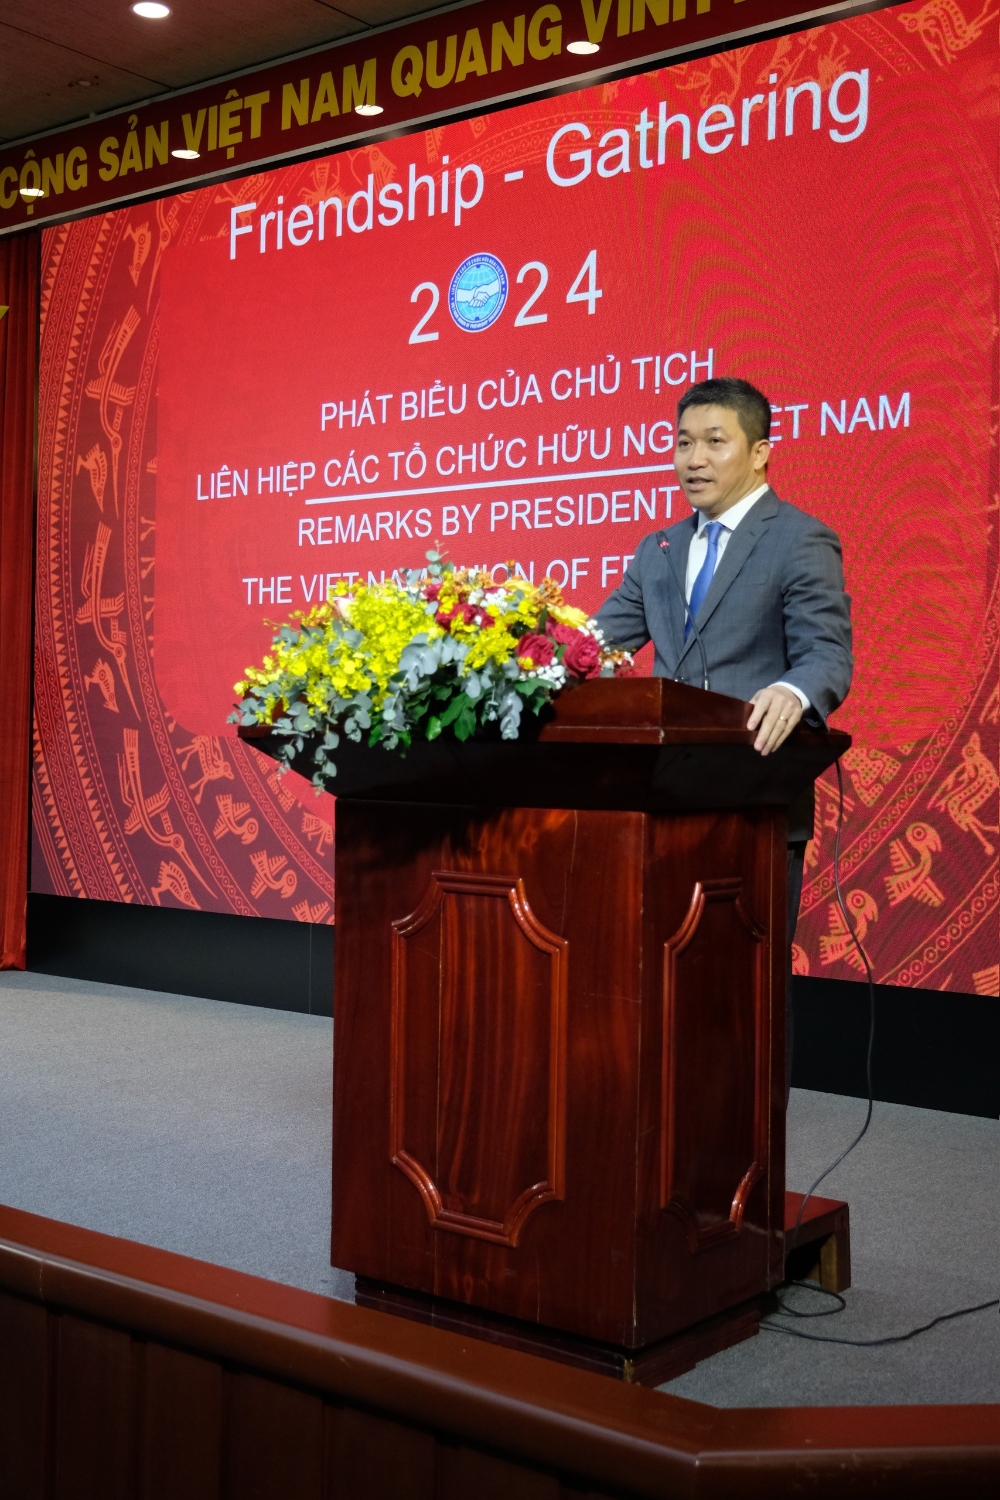 VUFO President Phan Anh Son delivers his speech at the event. Photo: Thoi Dai